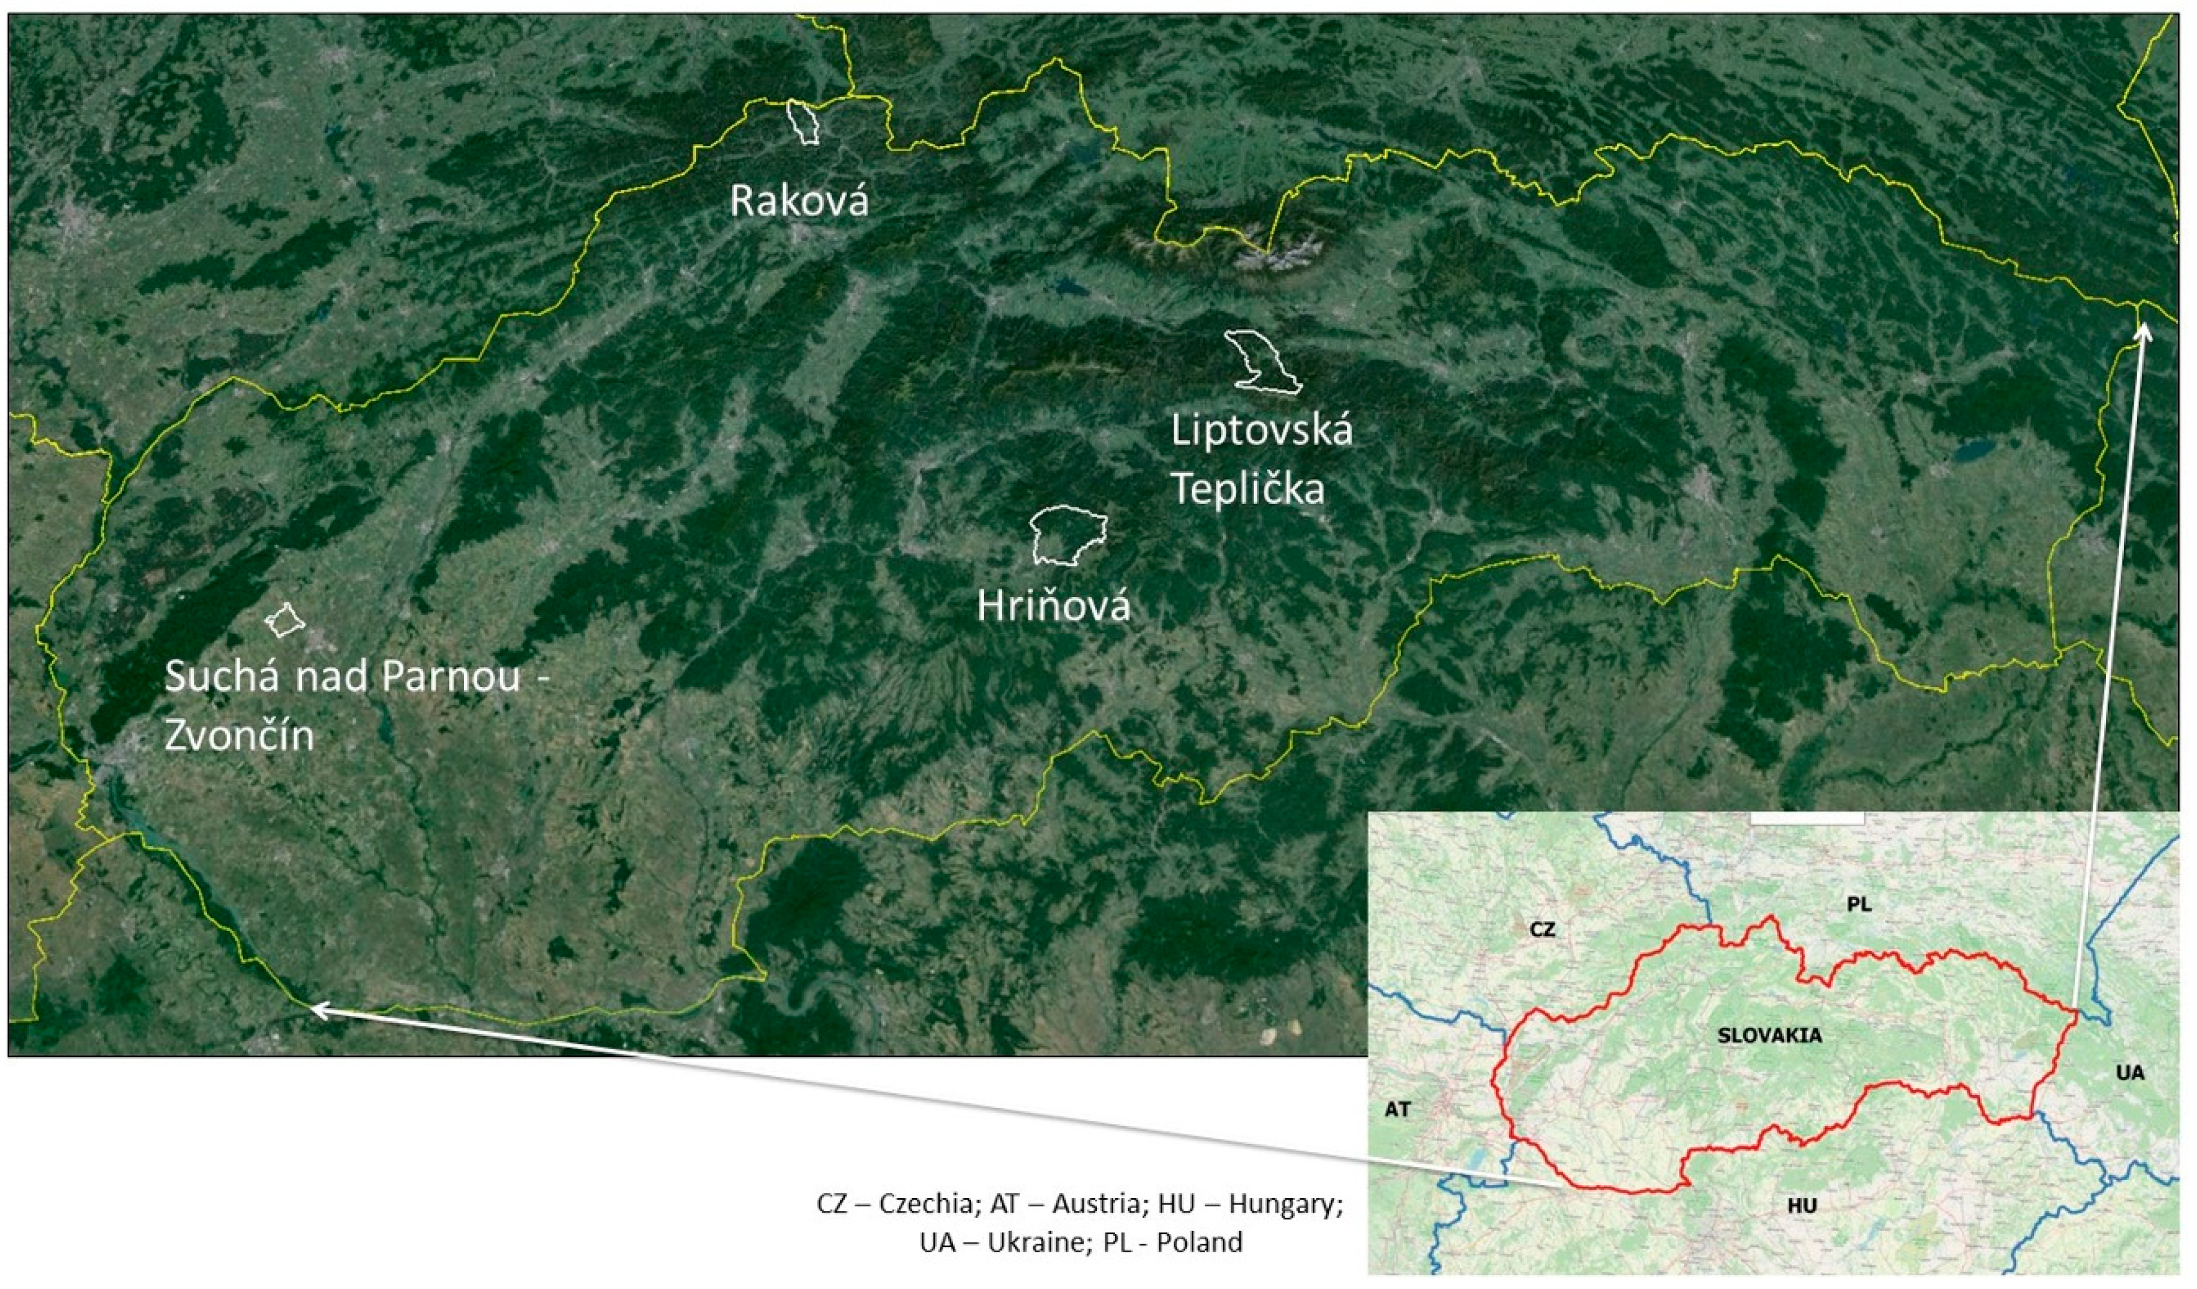 Land | Free Full-Text | Perception of Ecosystem Services in Constituting  Multi-Functional Landscapes in Slovakia